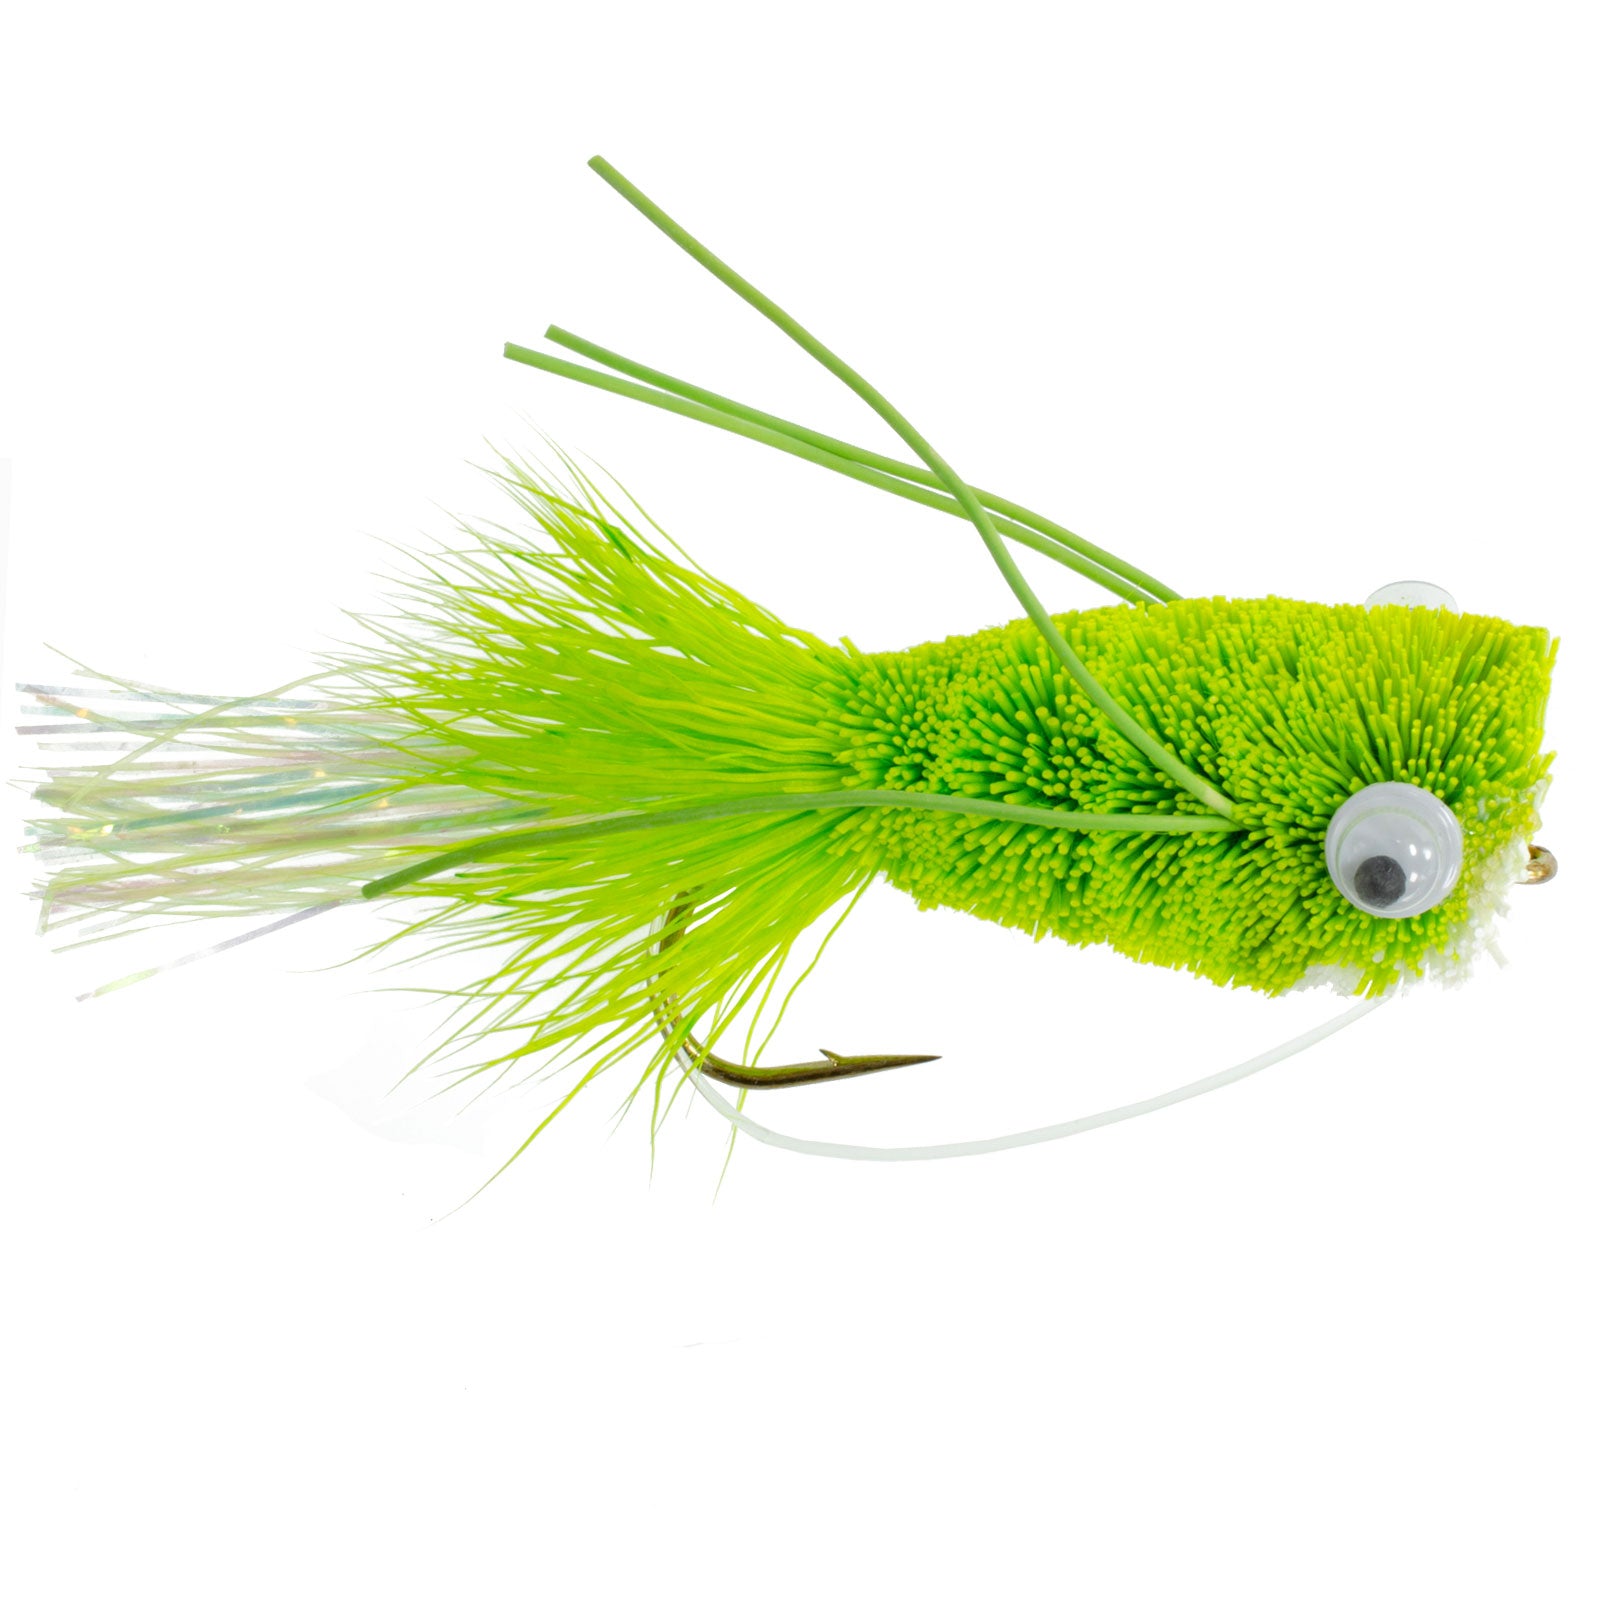 Flashtail Bass Popper Size 6 - Chartreuse Bass Fly Fishing Bug Wide Gape Bass Hooks With Weed Guard